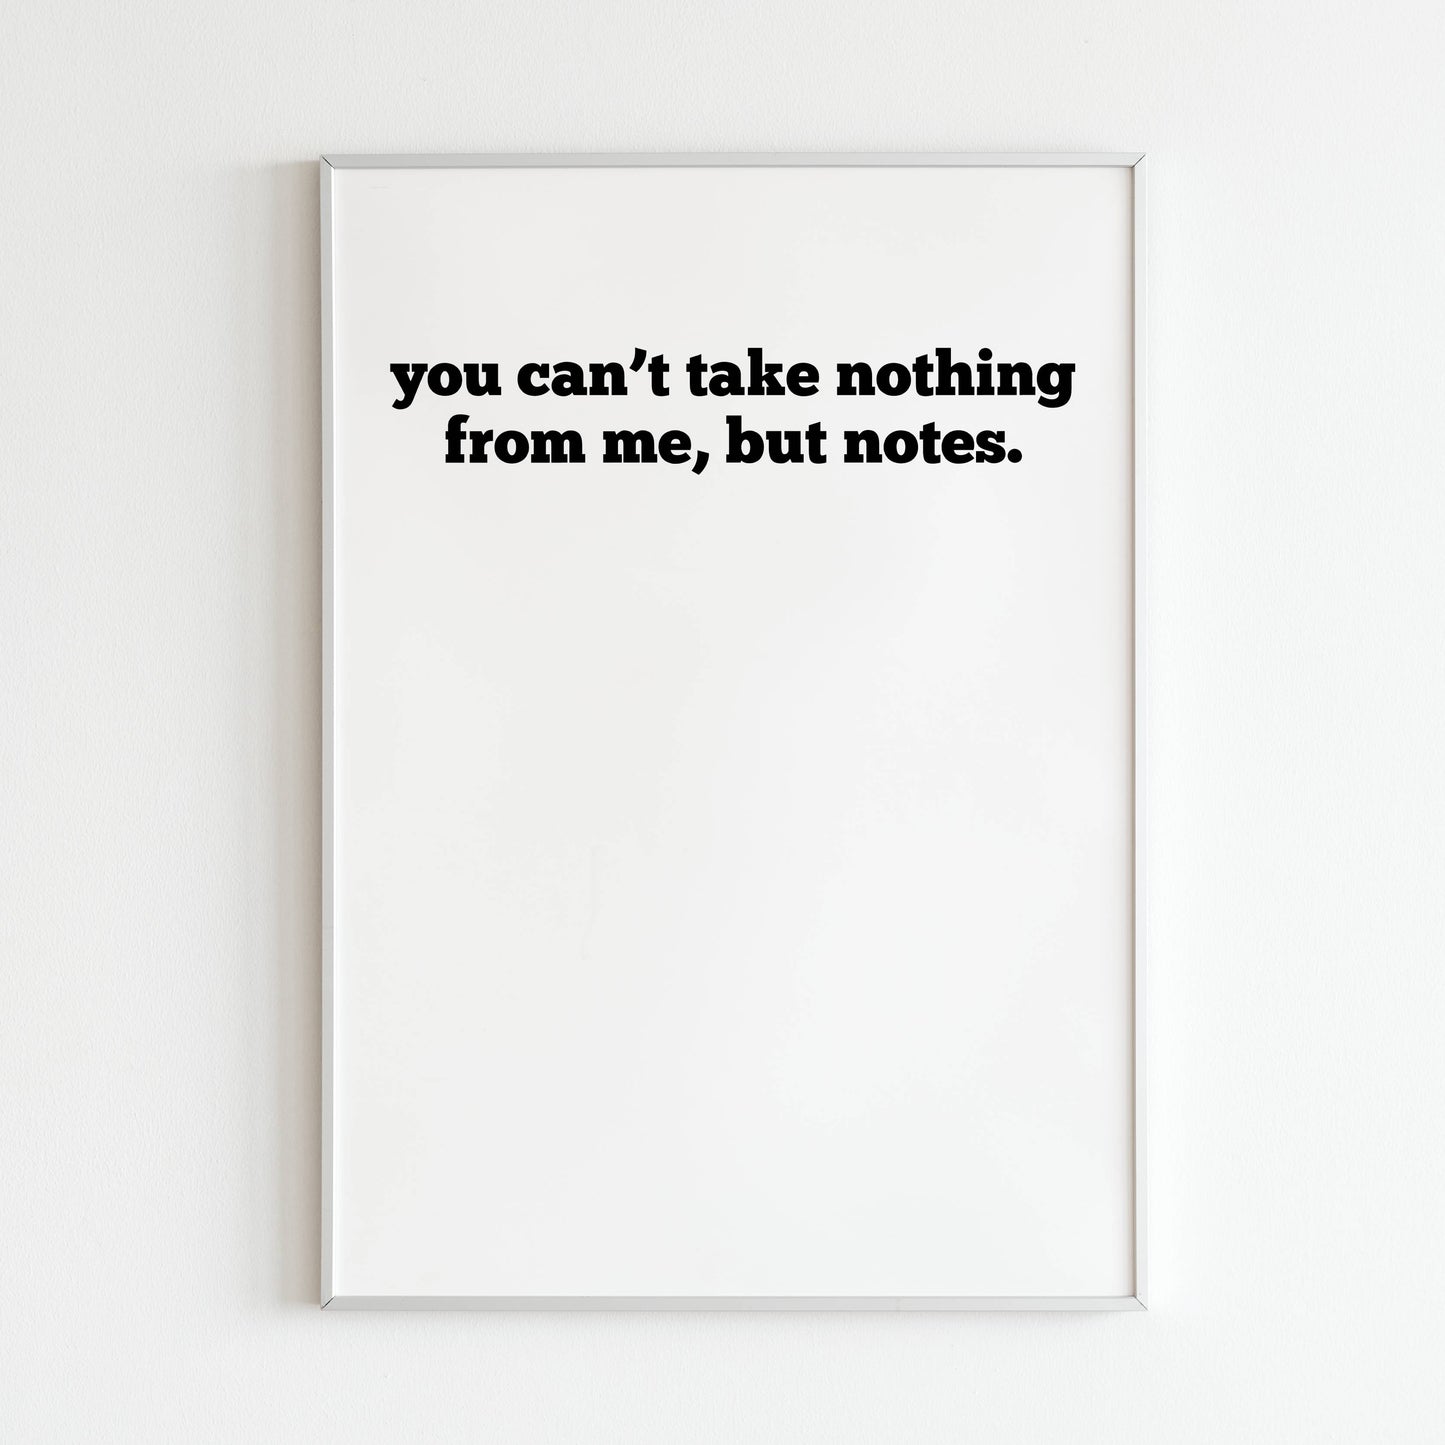 Downloadable "You can't take nothing from me, but notes" art print, express your resilience and individuality with a touch of humor.